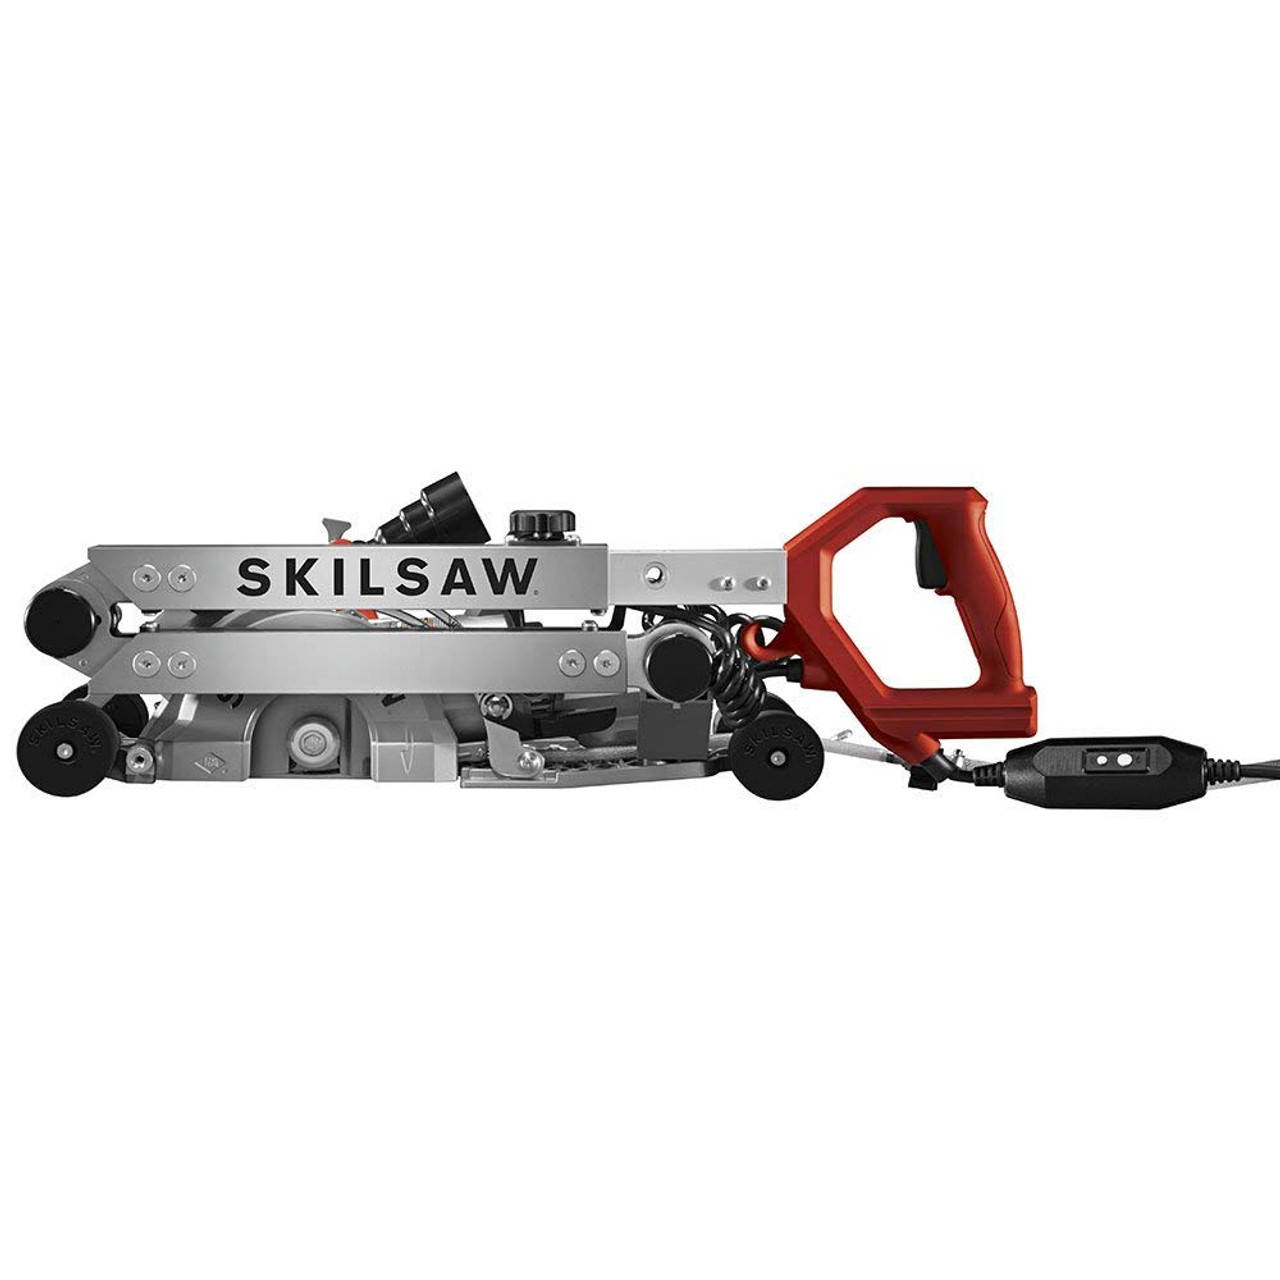 SKILSAW SPT79-00 15-Amp Medusaw Worm Drive Saw for Concrete, 7",Silver - 1